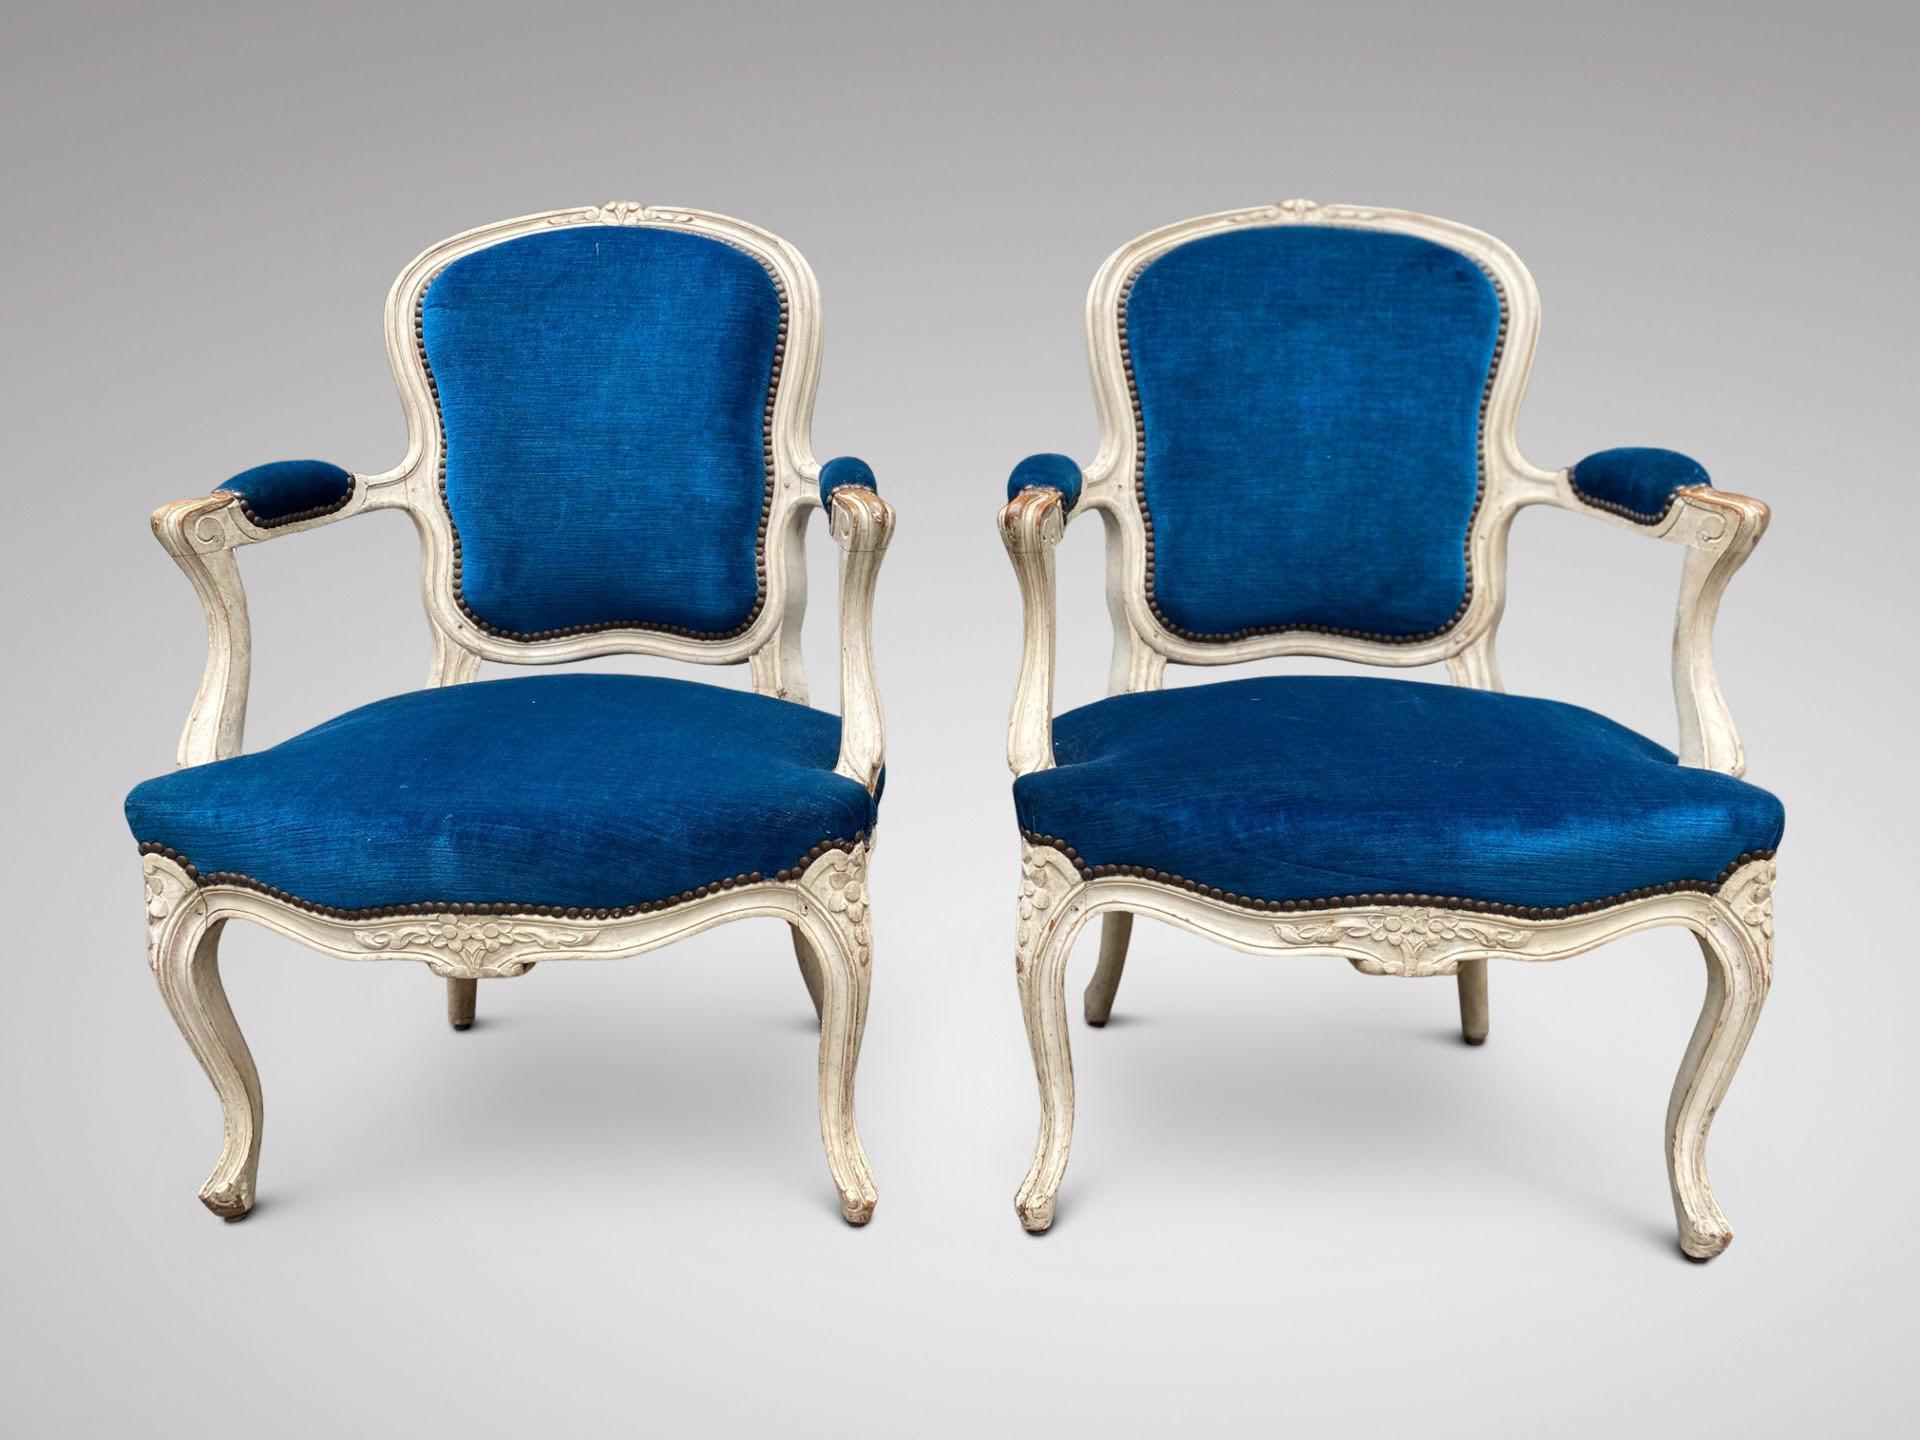 A decorative pair of late 19th century French Louis XV walnut patinated bergères armchairs, upholstered in a blue velvet fabric, with carved decoration to the frame. Very comfortable armchairs. Great patina.

The dimensions are:
Height: 88cm